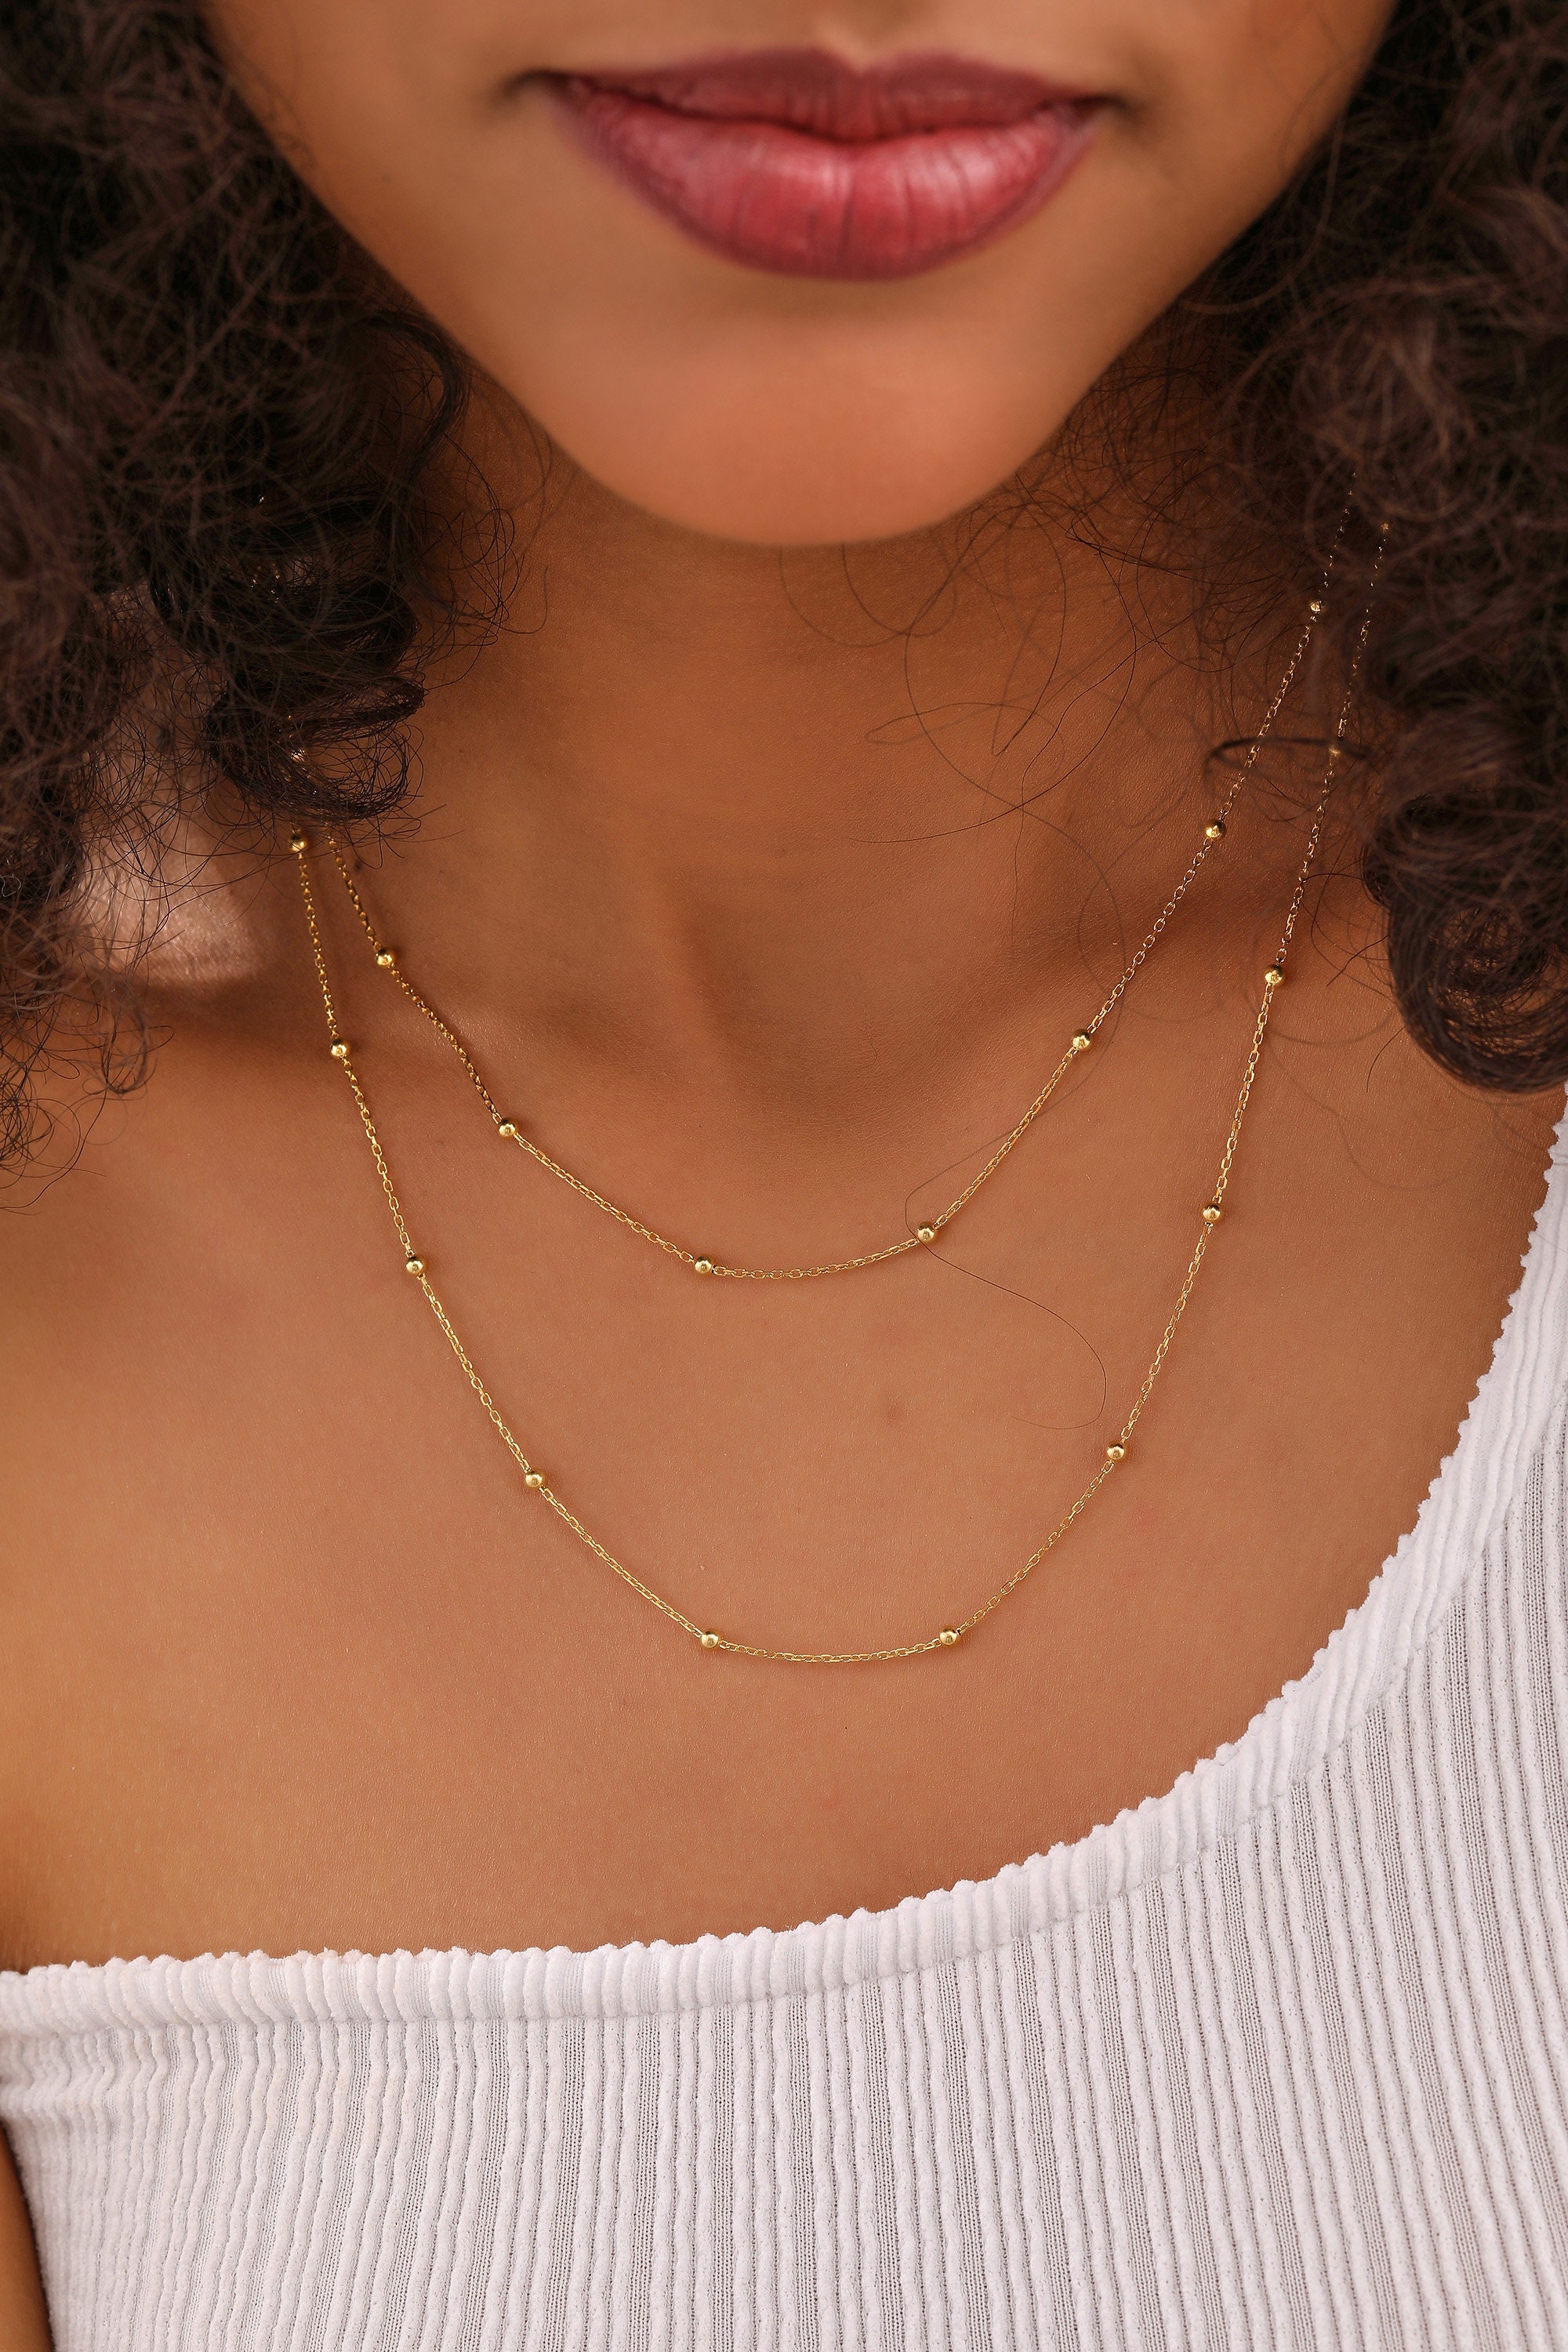 14K Gold Chains for Necklaces, Pearl Bead Necklace, Dainty Necklace, Box  Chain, Rope Chain, Full Pearl Necklace 